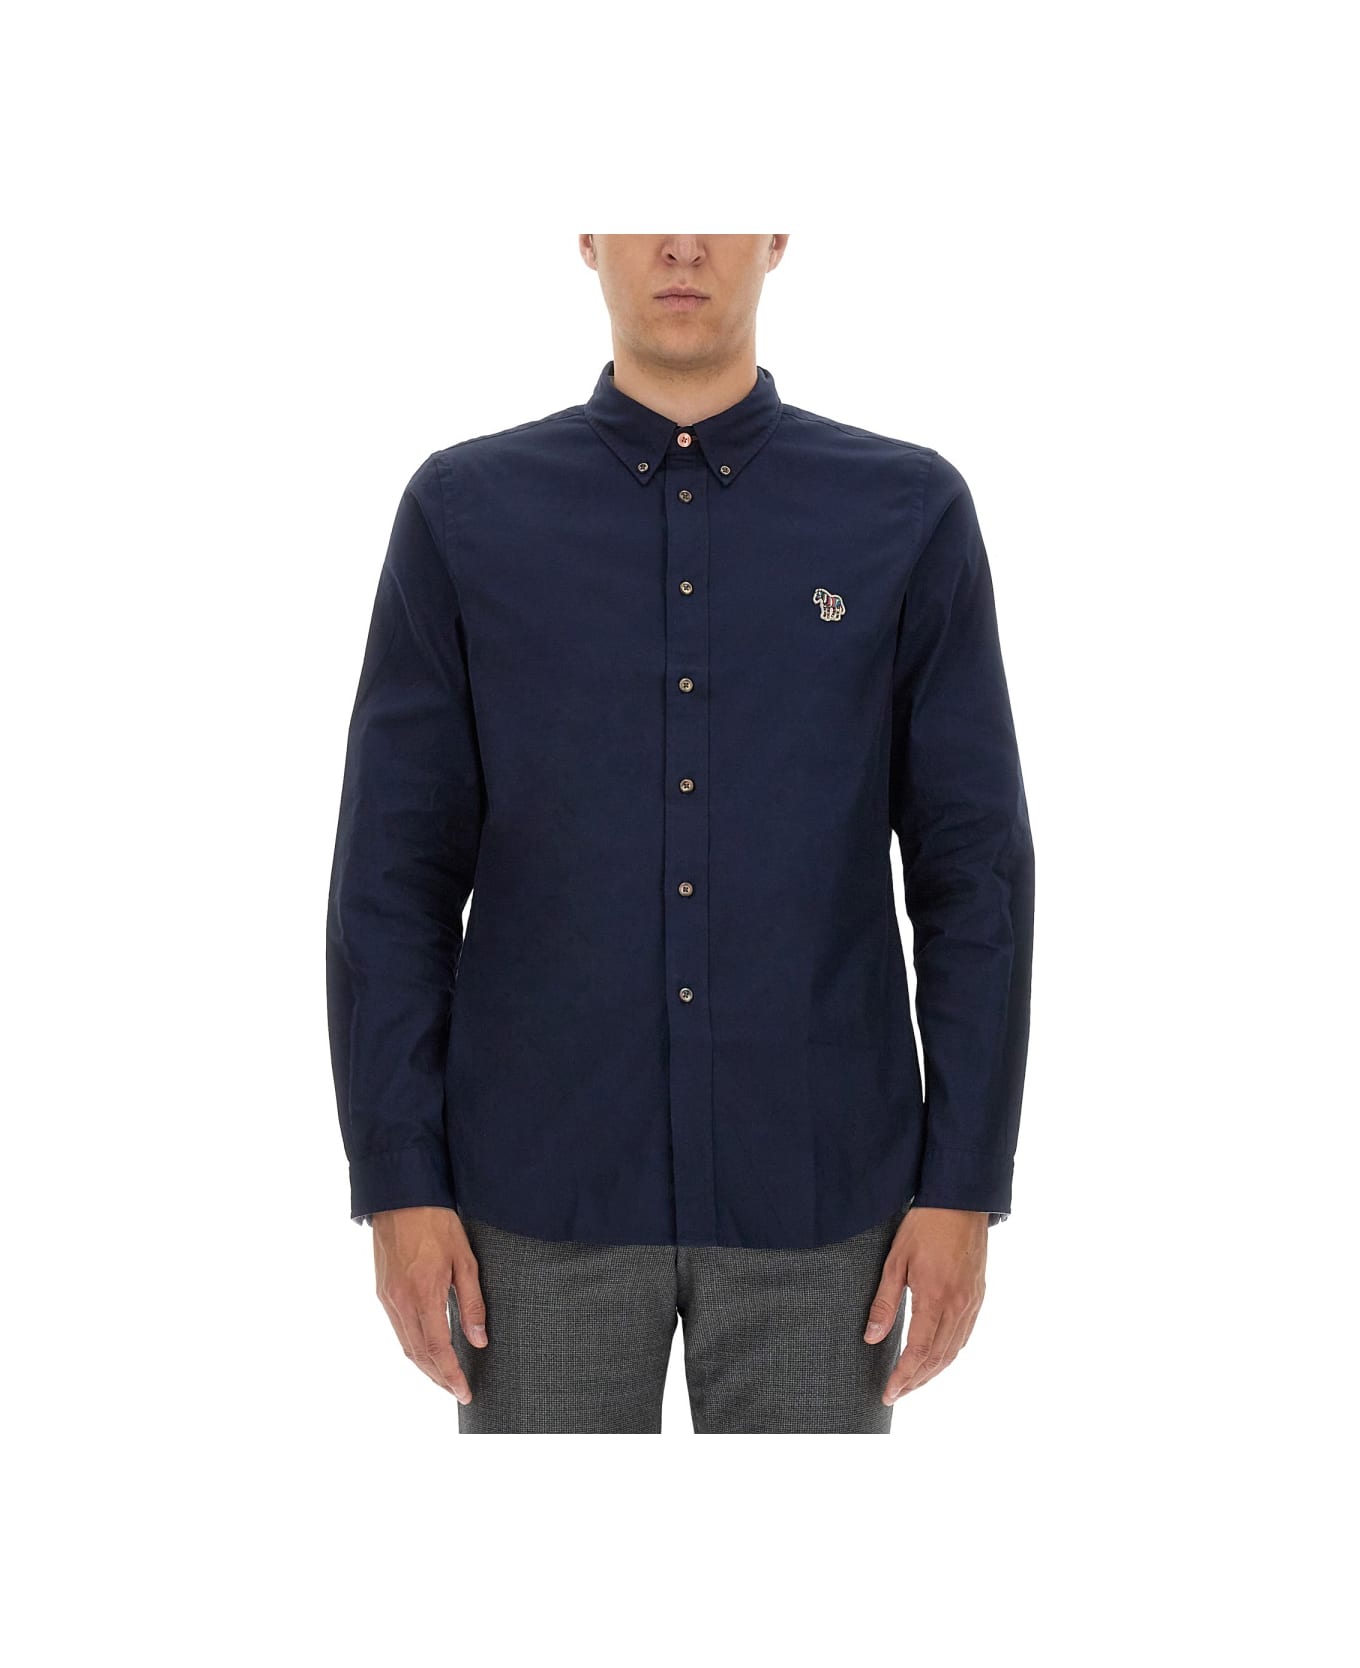 PS by Paul Smith Regular Fit Shirt - BLUE シャツ